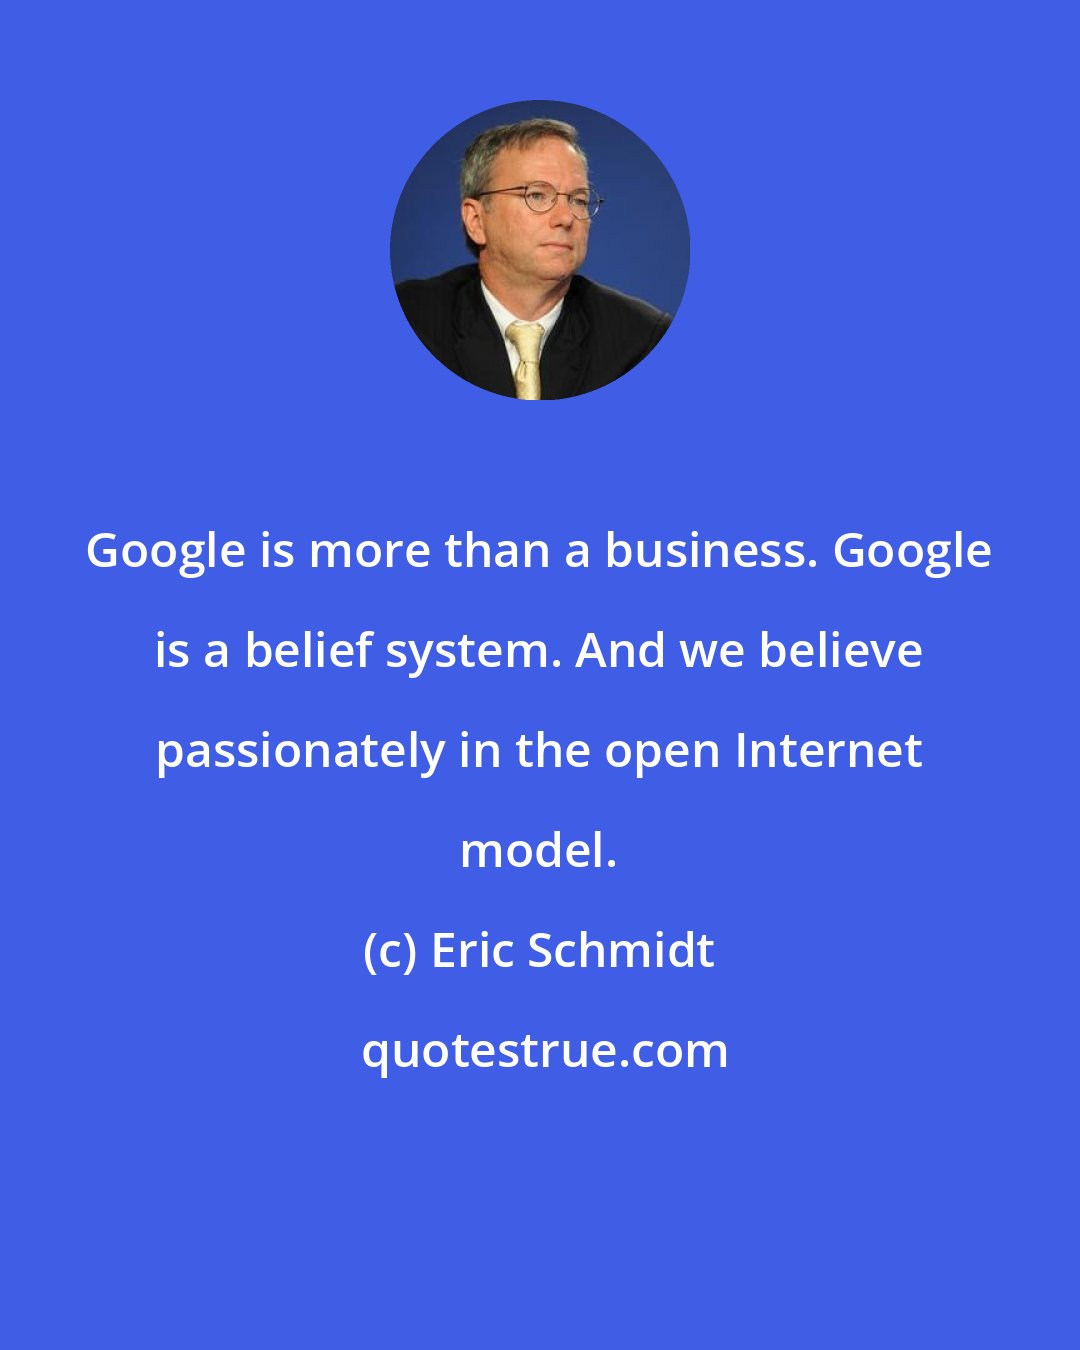 Eric Schmidt: Google is more than a business. Google is a belief system. And we believe passionately in the open Internet model.